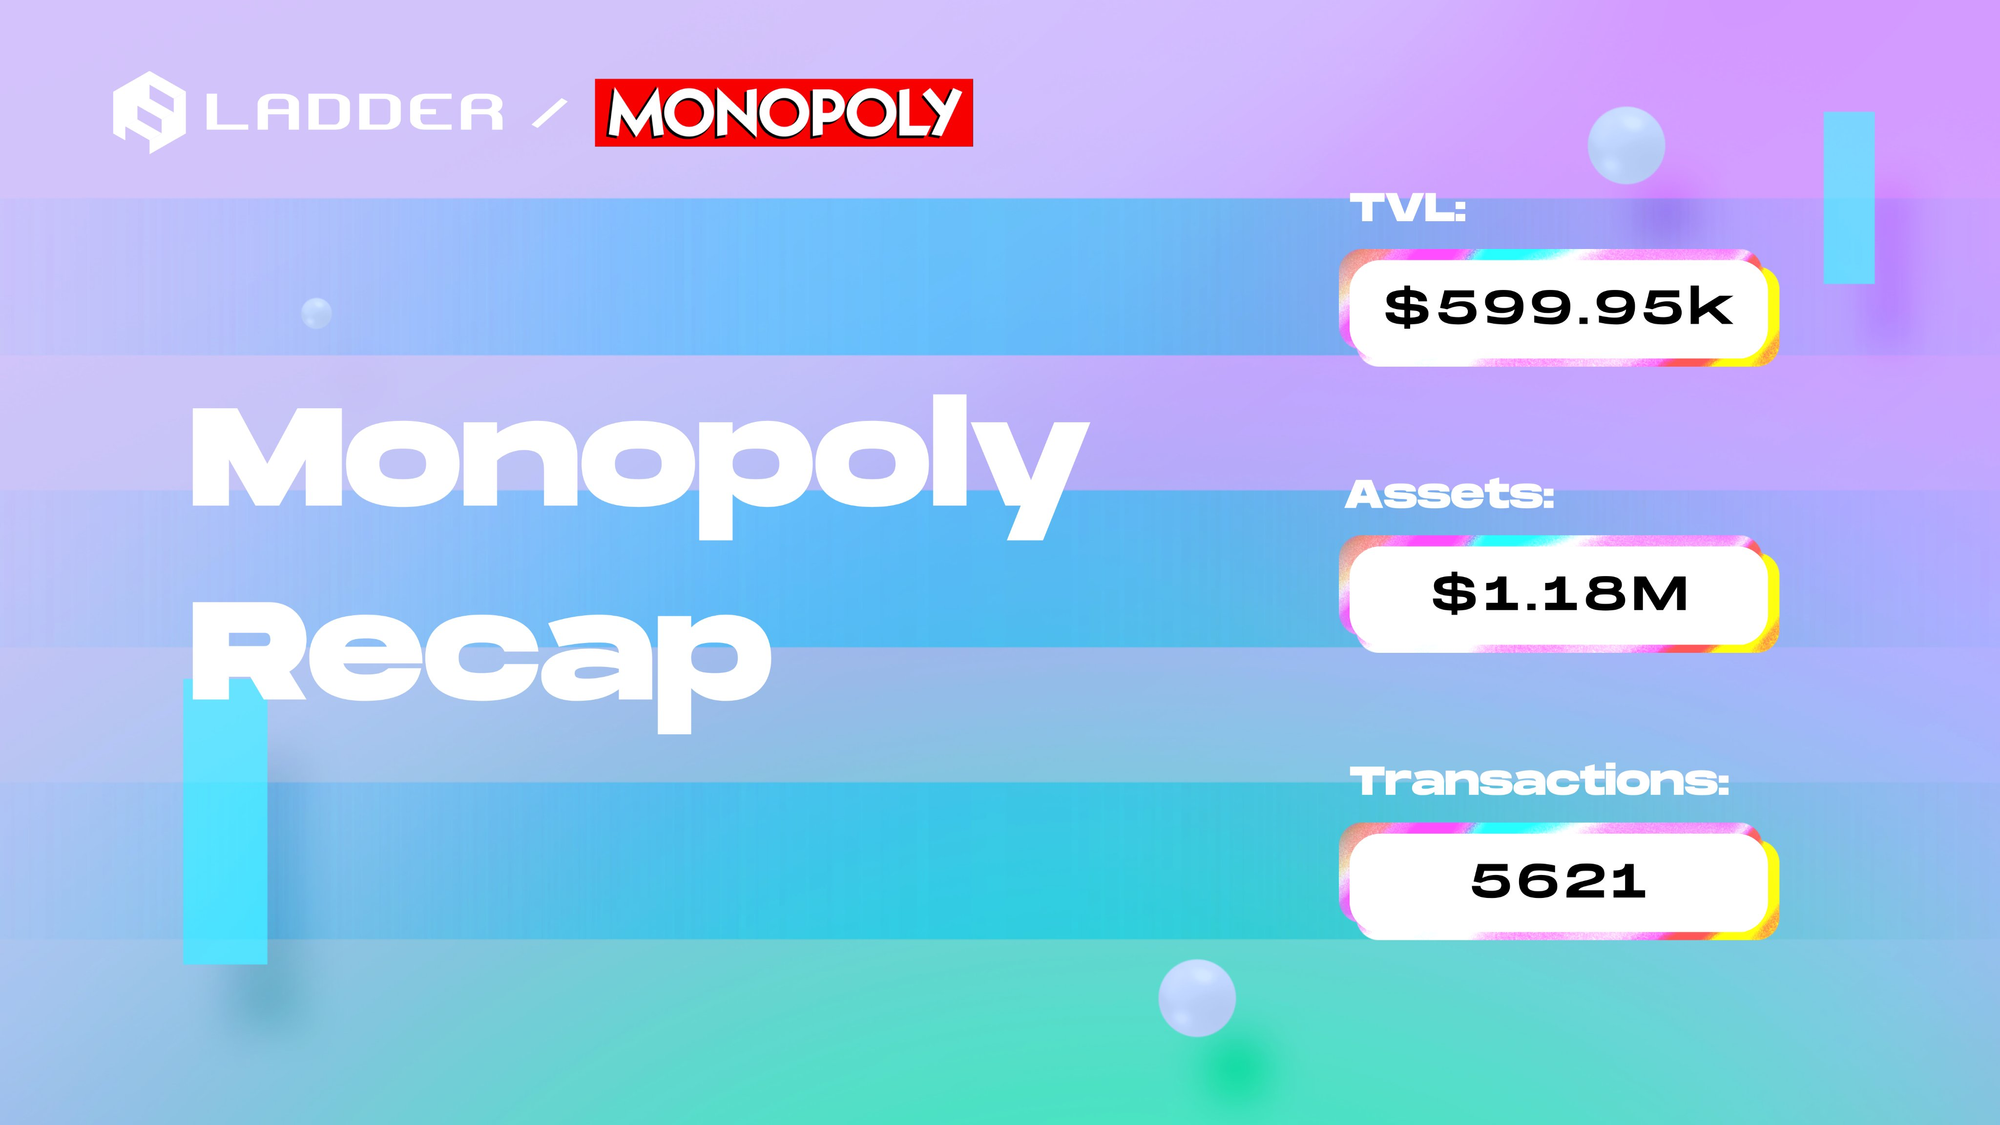 Trader Made 16,000% profit in Ladder Monopoly NFT Trading Competition